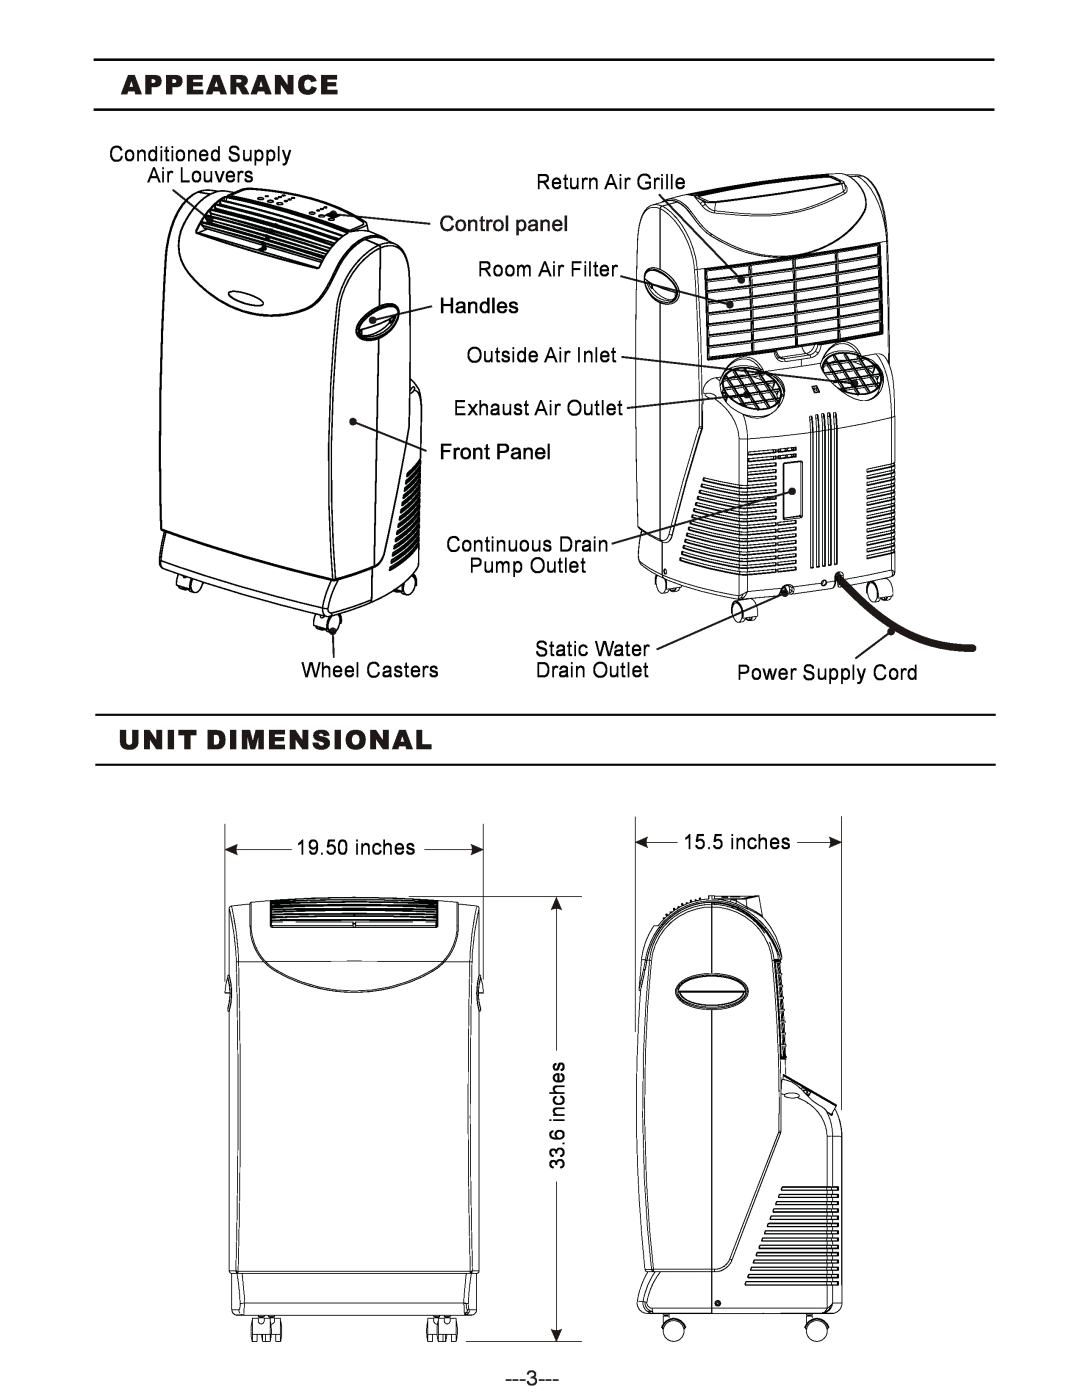 Friedrich Models PH14B, Portable Air Conditioner technical specifications Conditioned Supply 